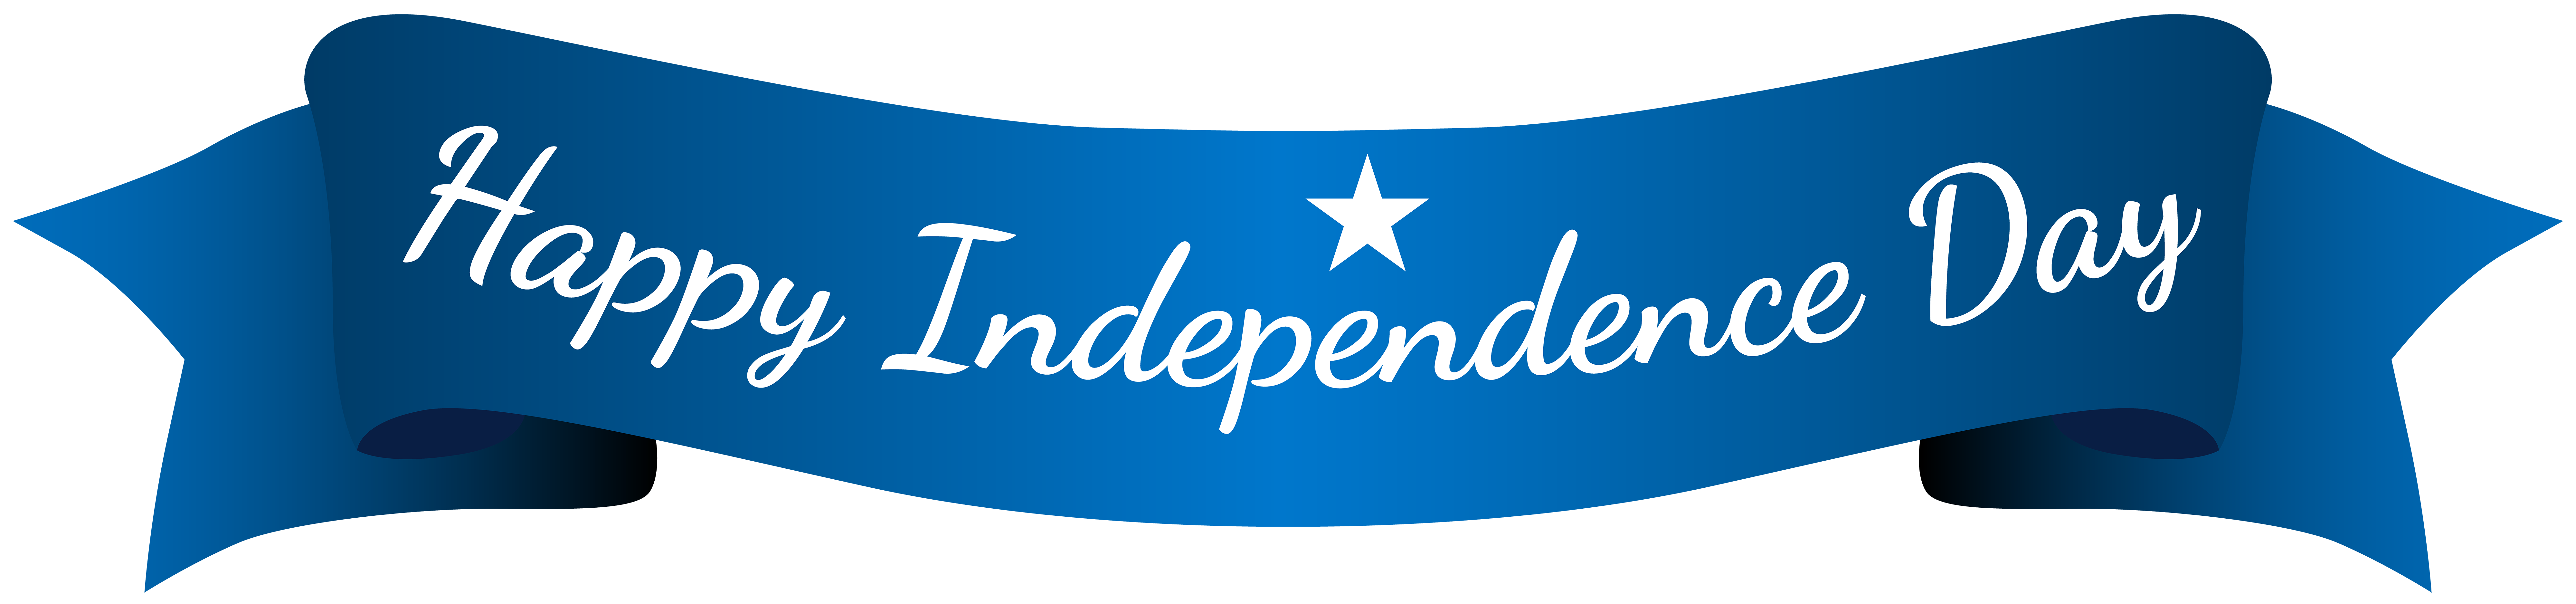 Happy independence day banner. Clipart ruler blue